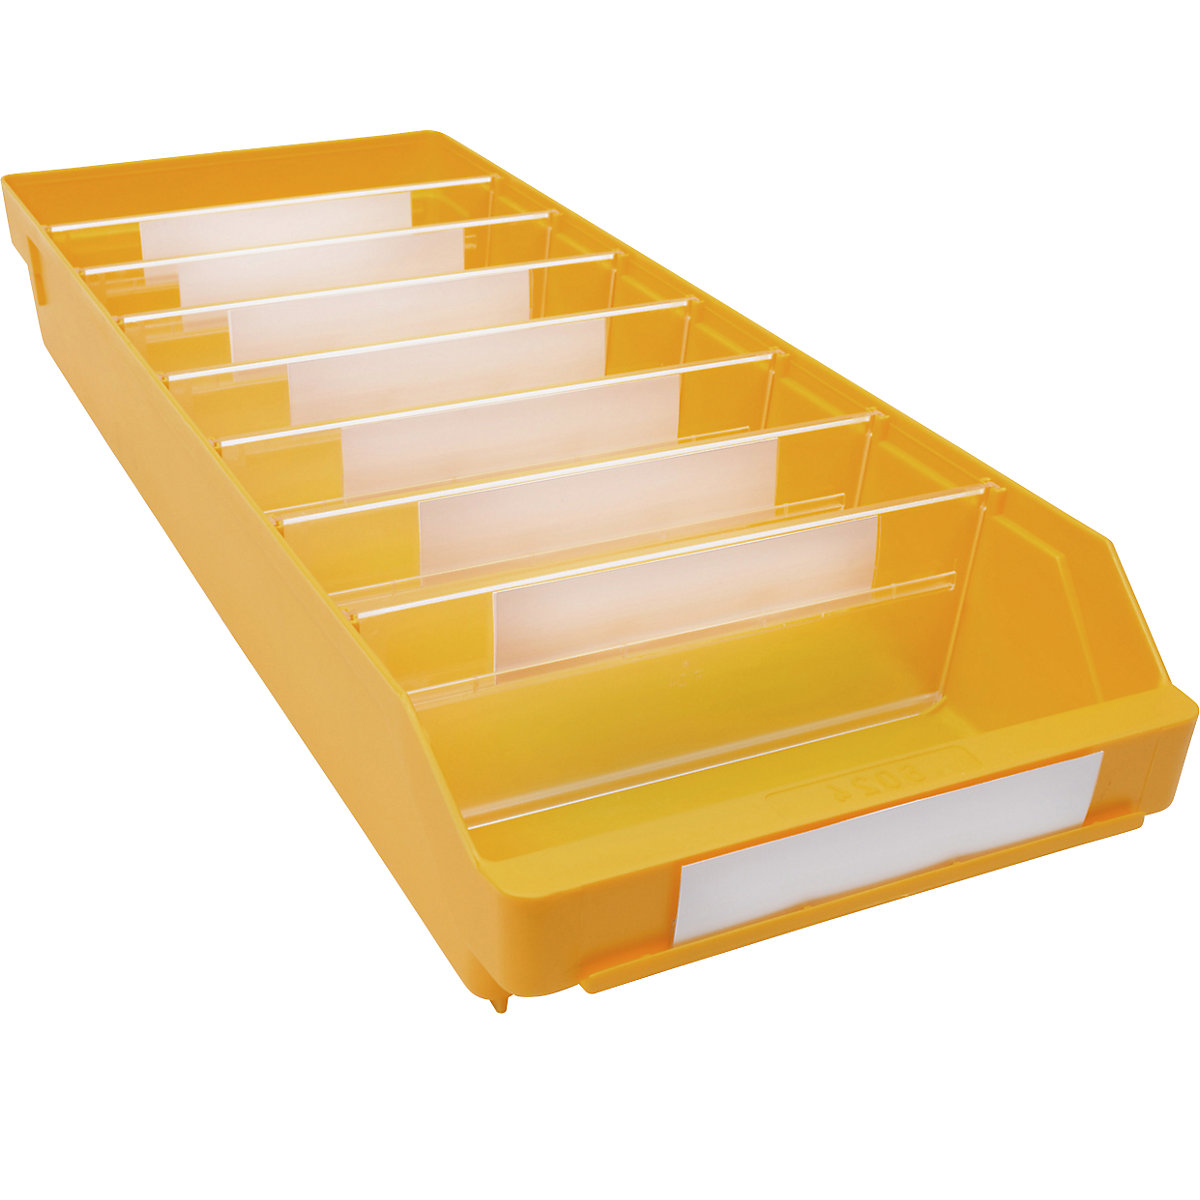 Shelf bin made of highly impact resistant polypropylene – STEMO, yellow, LxWxH 600 x 240 x 95 mm, pack of 15-17